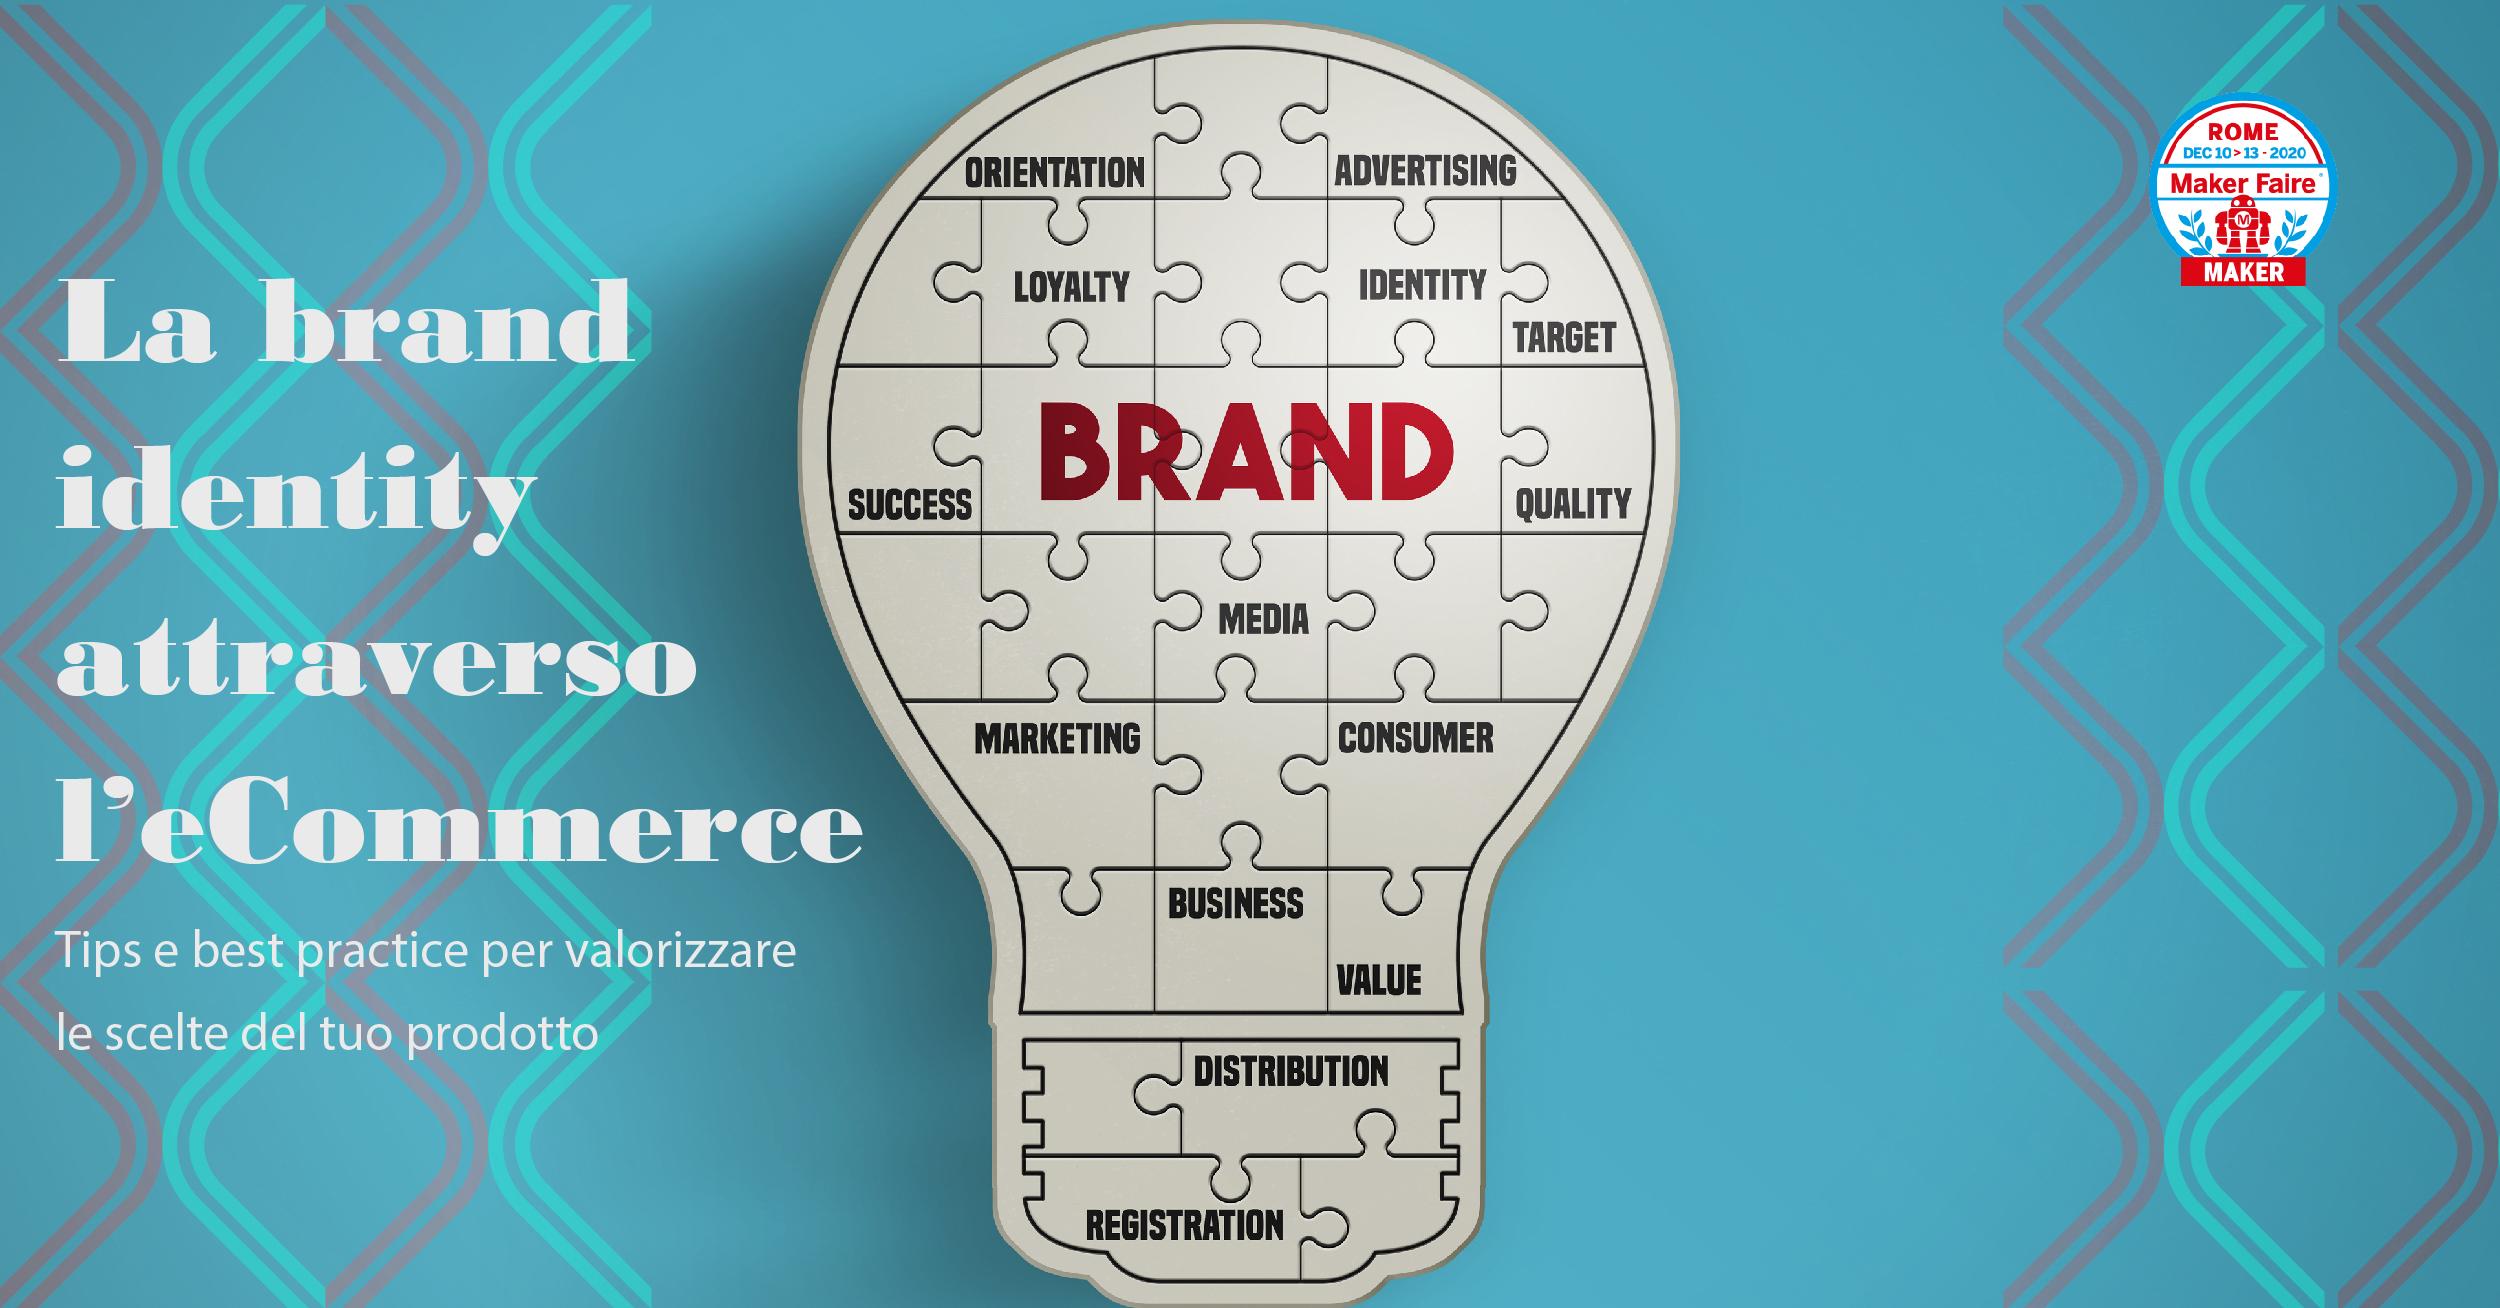 Brand identity through eCommerce_ Tips and best practices to enhance the choices of your product